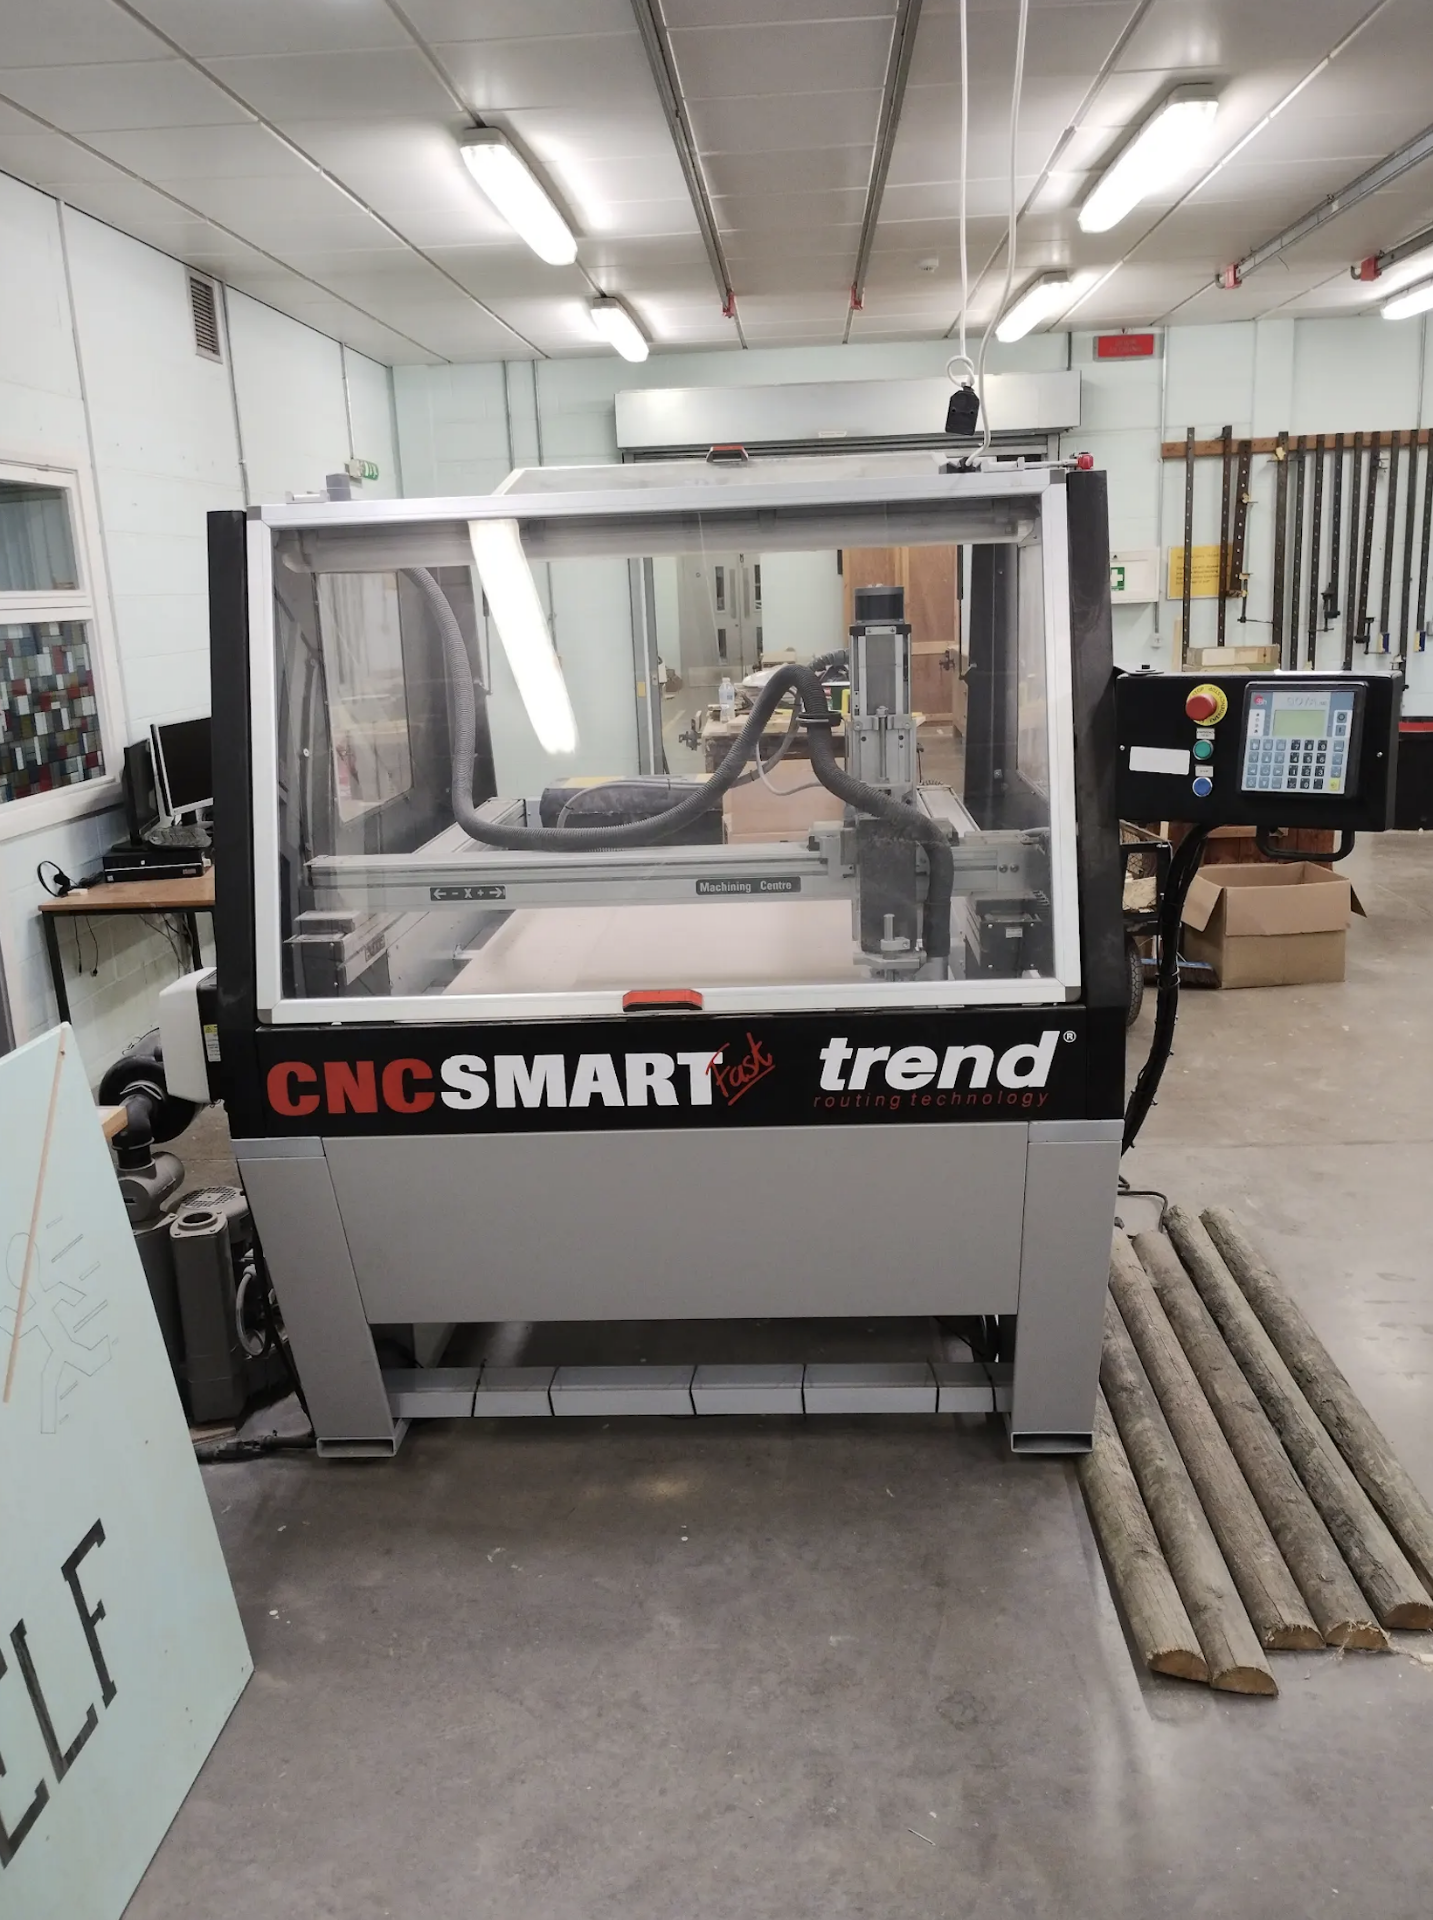 Trend Smartfast CNC Carpentry Router (Approx. 6 yrs old) Ref: 7045-0317-SK01 - Image 10 of 10